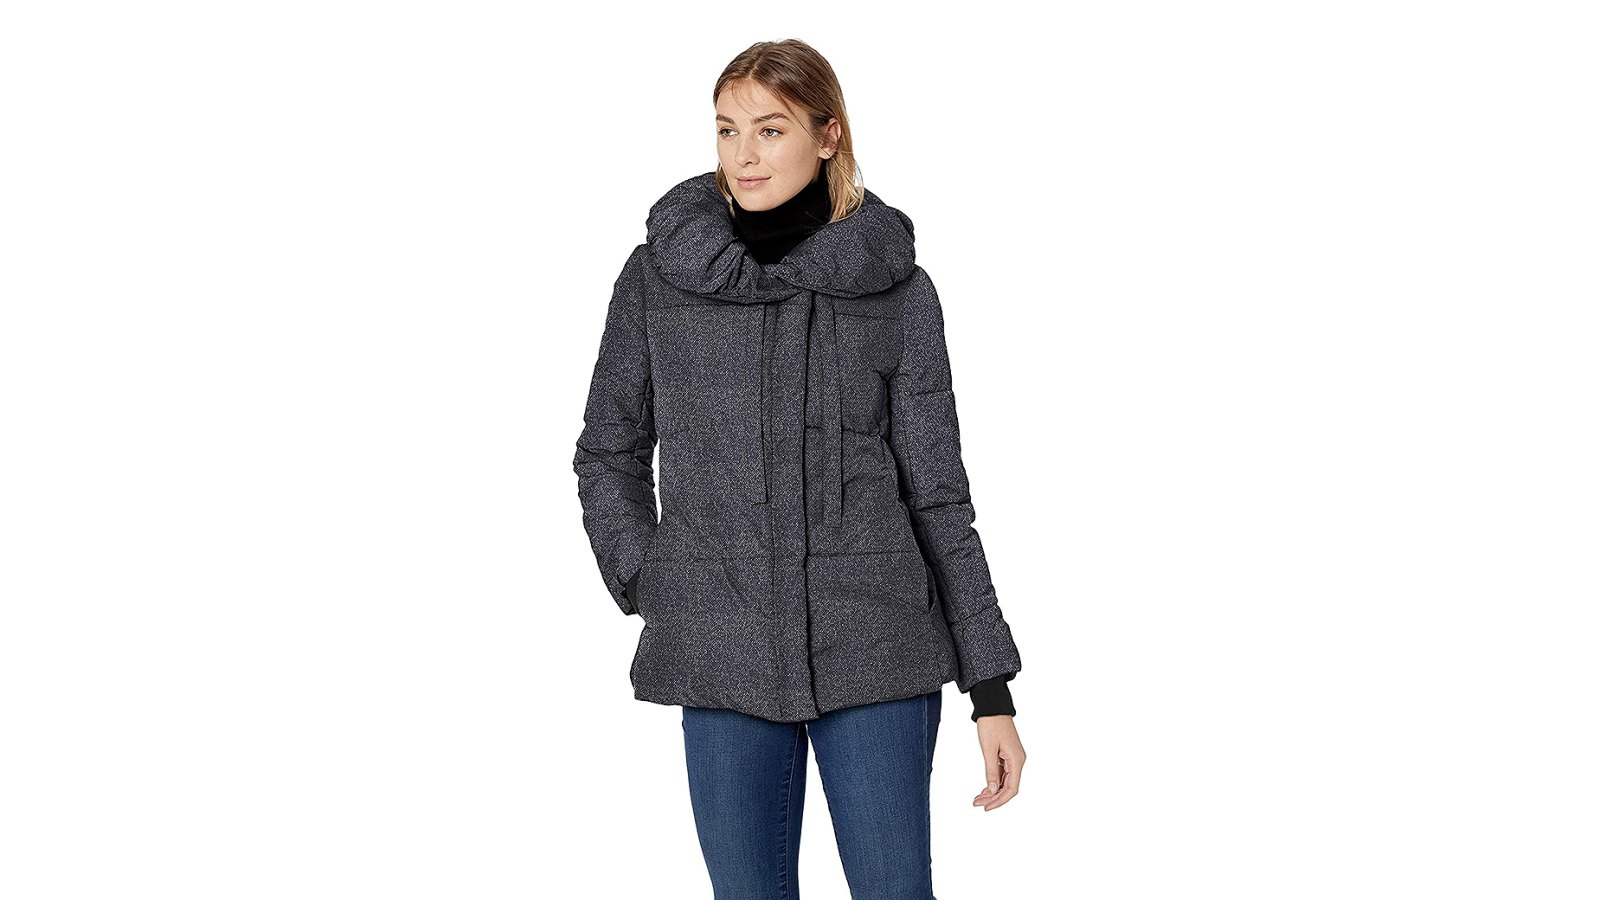 Lark & Ro Pillowy Puffer Coat Is on Major Sale at Amazon | Us Weekly